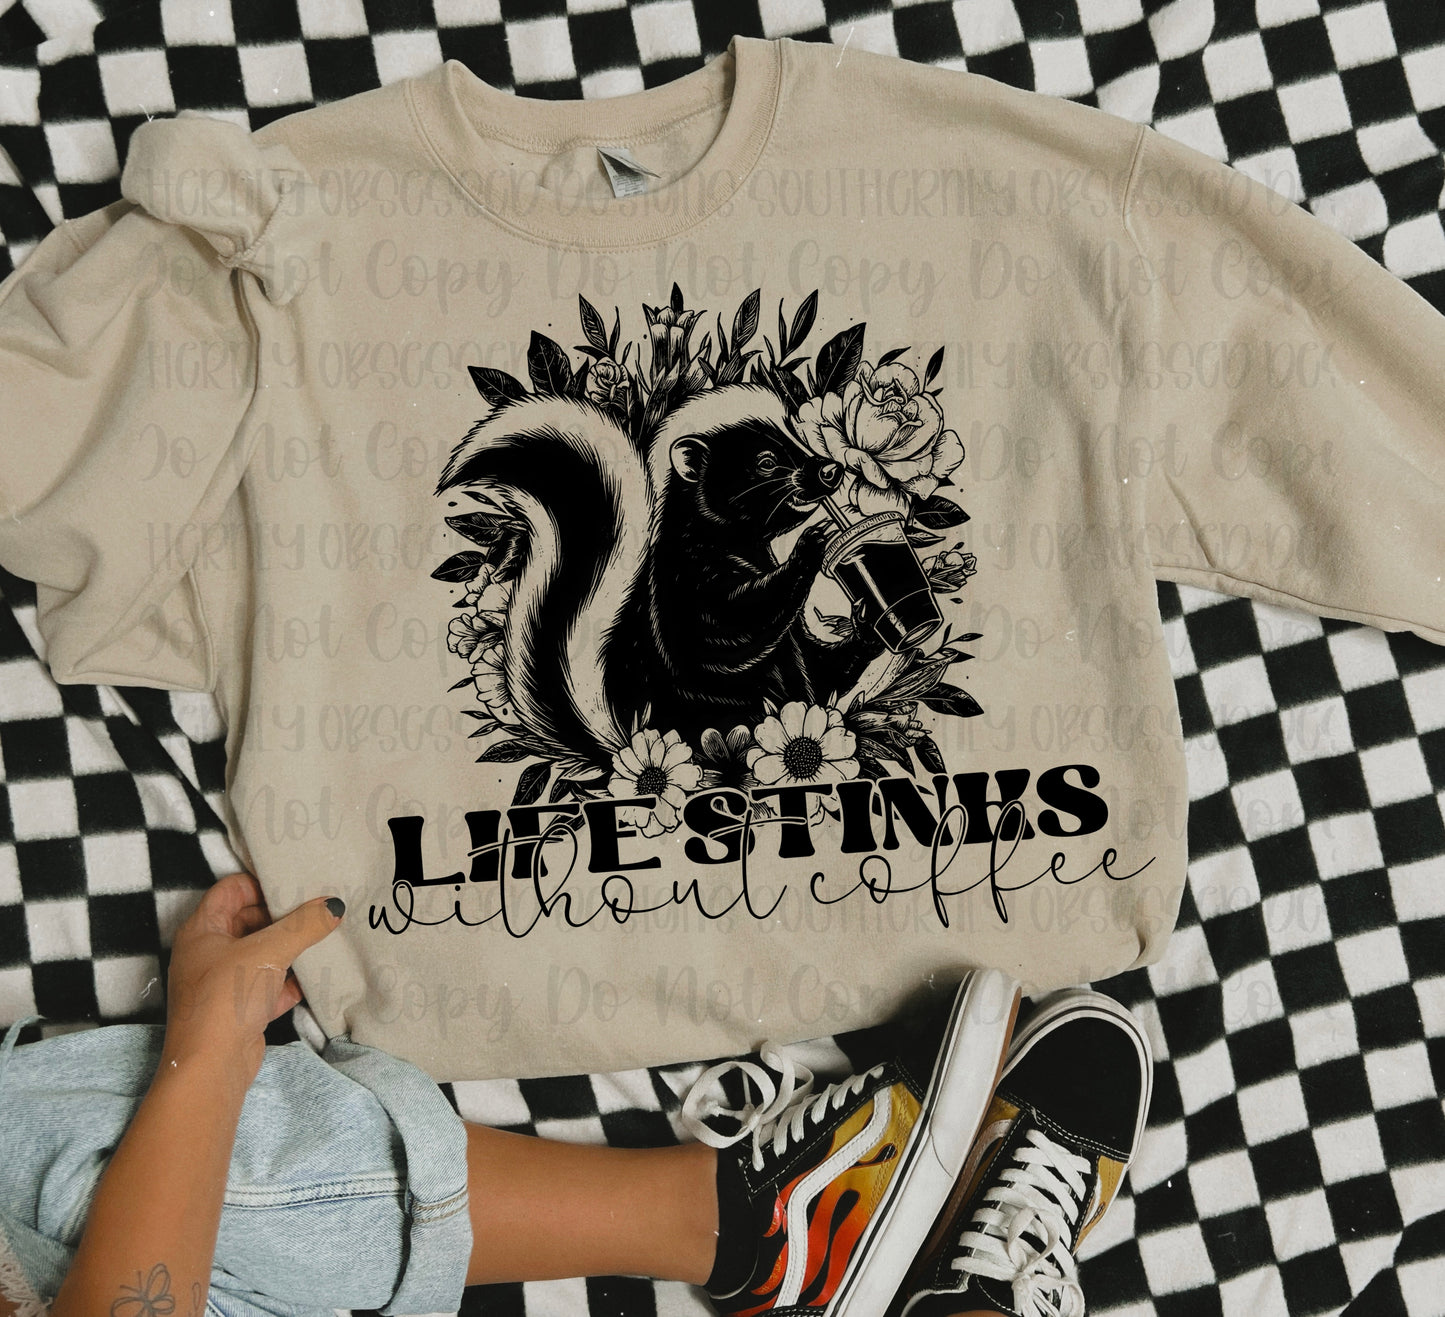 Life Stinks Without Coffee Digital Design